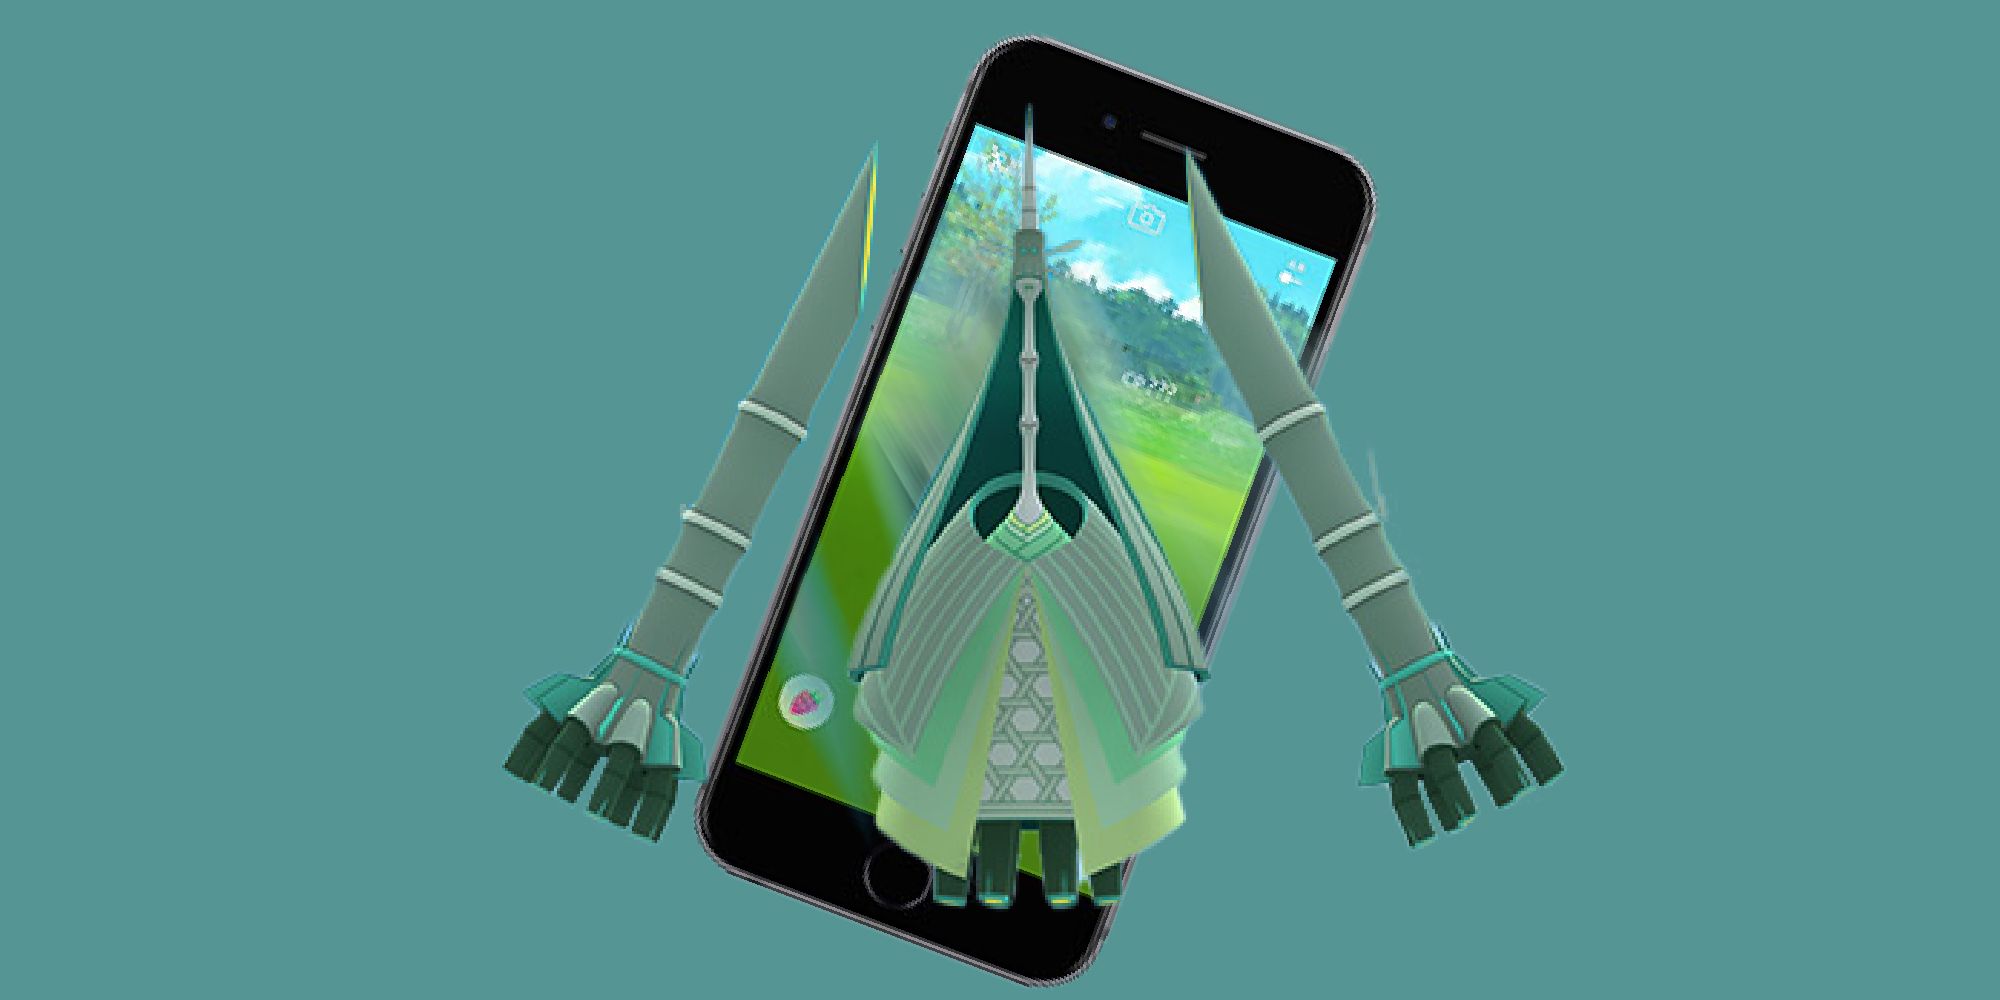 Couple of Gaming on X: #Celesteela is also appearing in raids in #PokemonGO!  (Screenshot directly from within campfire) 🏕️ Download graphic here 👇🏻    / X